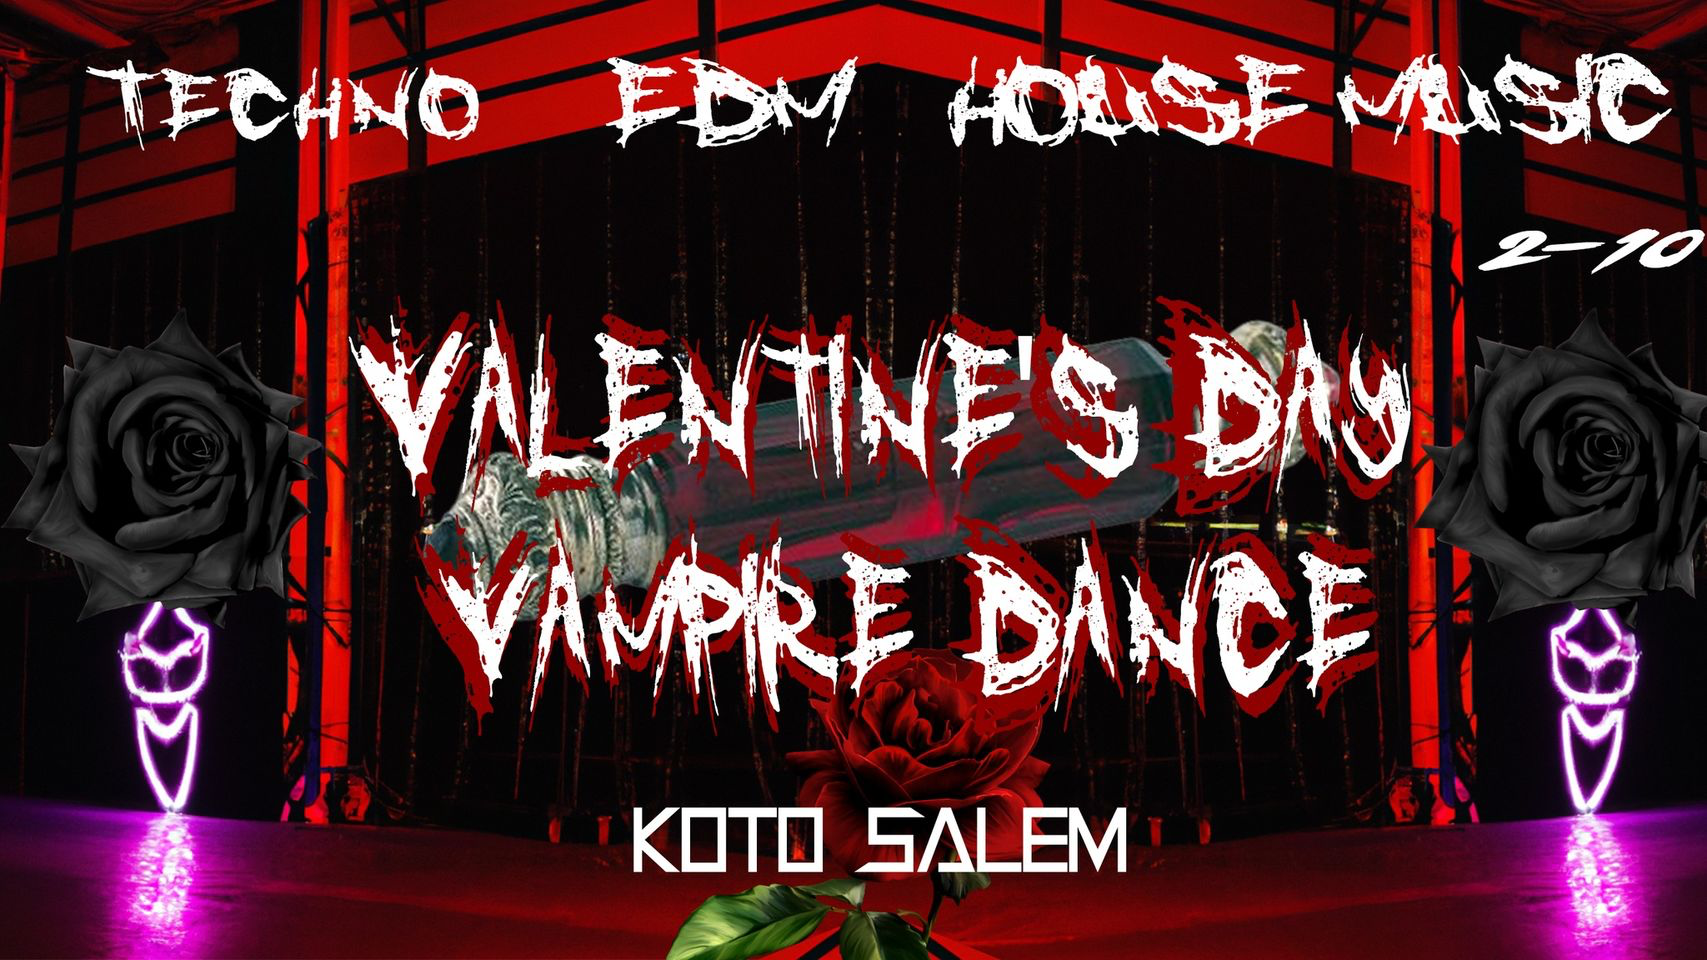 Join us for a unique Valentine's Day experience with our Vampire Dance. Perfect for those who love the supernatural, this event combines romance and dark fantasy elements to create an unforgettable evening. A great way to spend your Valentine's Day with a spooky twist.